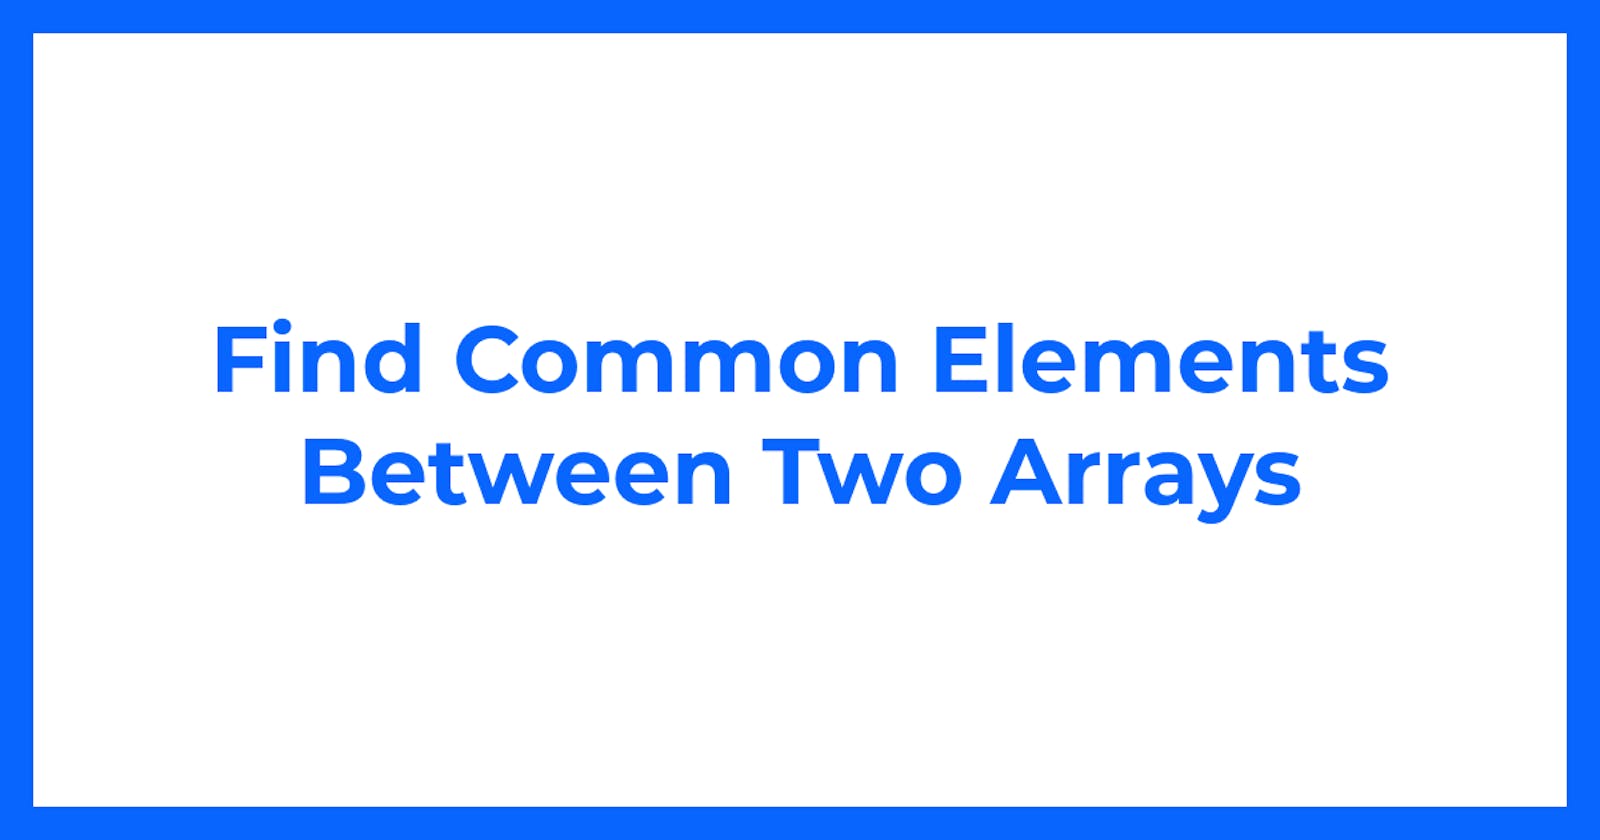 Find Common Elements Between Two Arrays